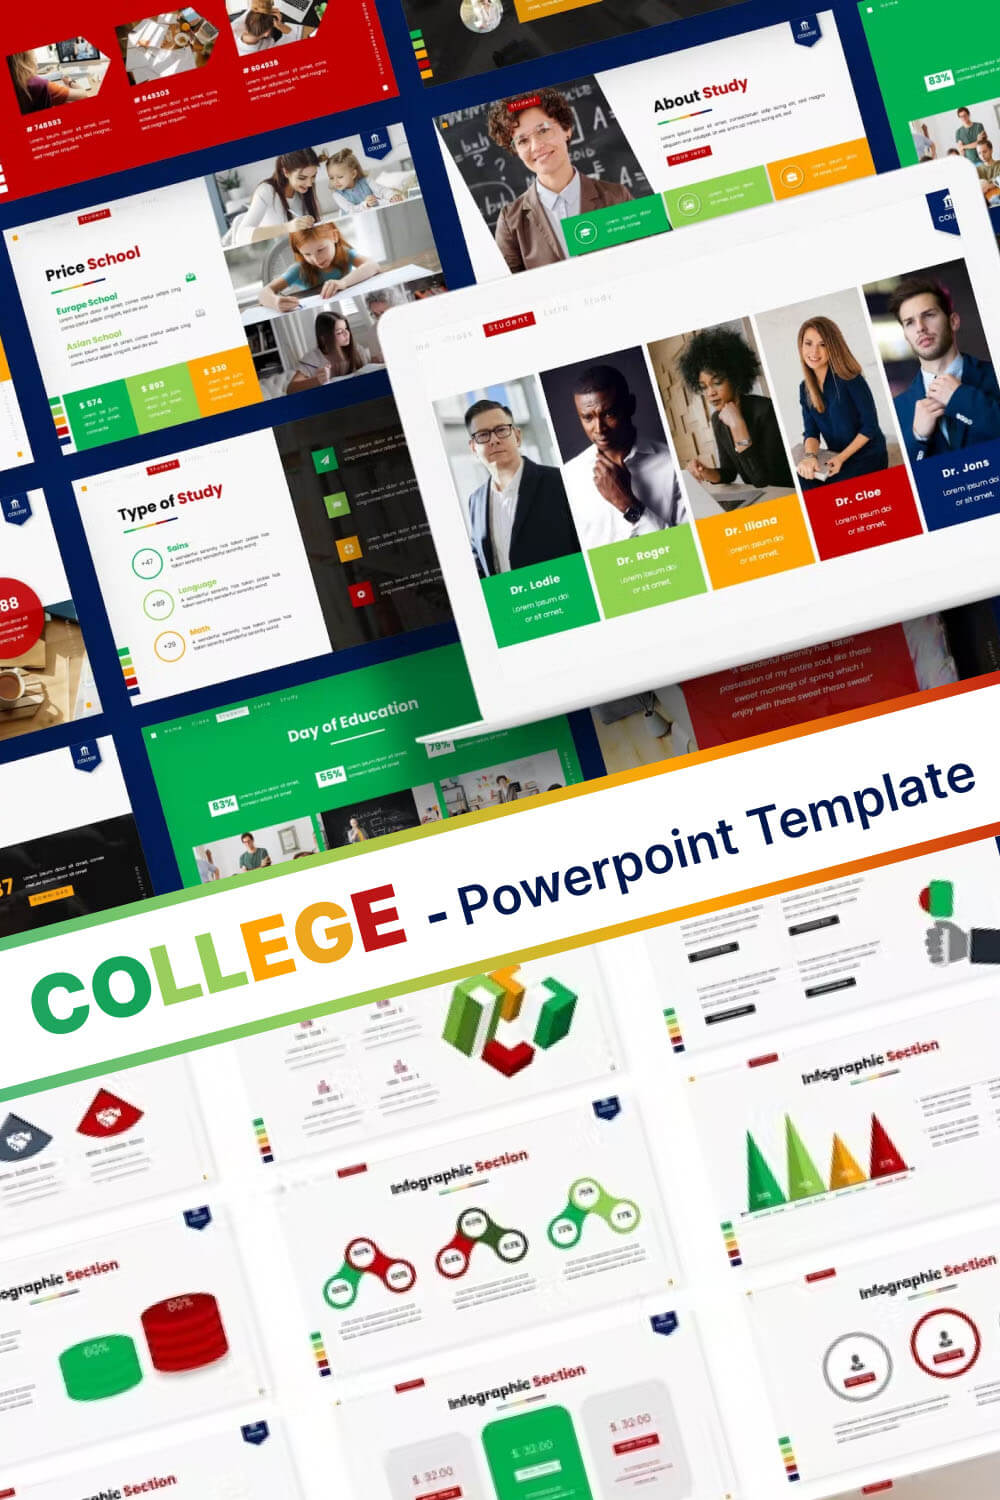 Price School of college - powerpoint template.